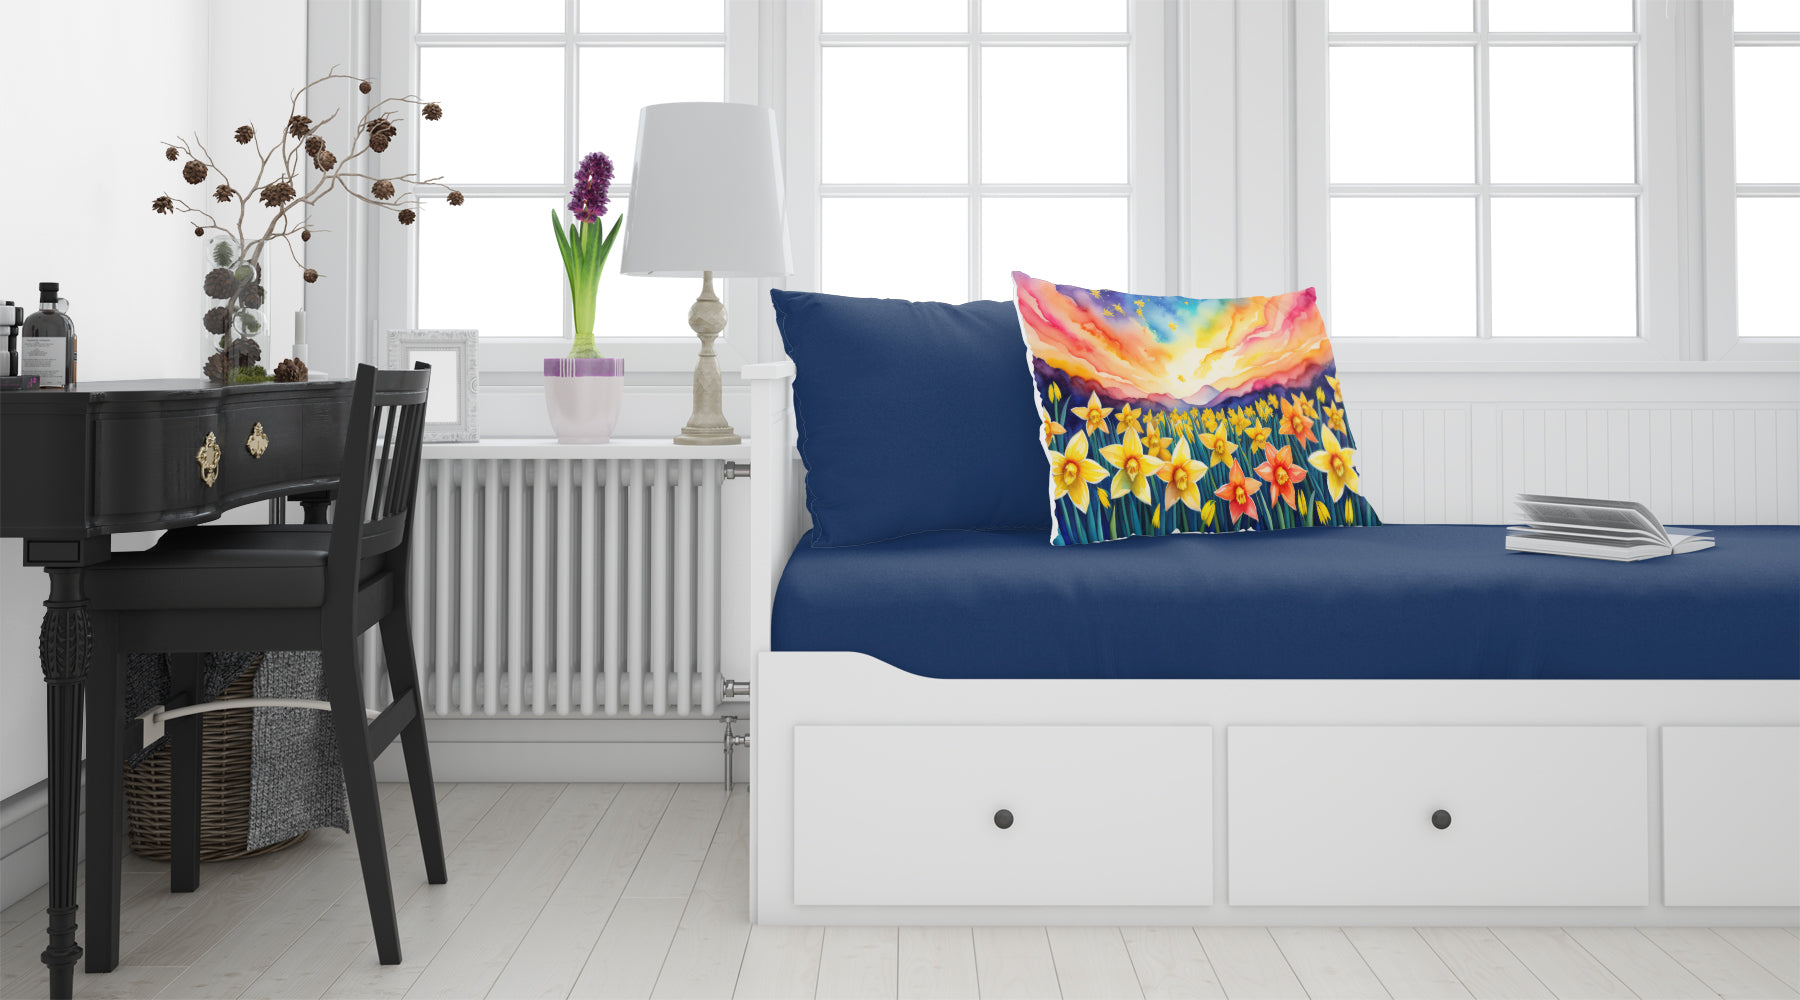 Buy this Daffodils in Color Fabric Standard Pillowcase